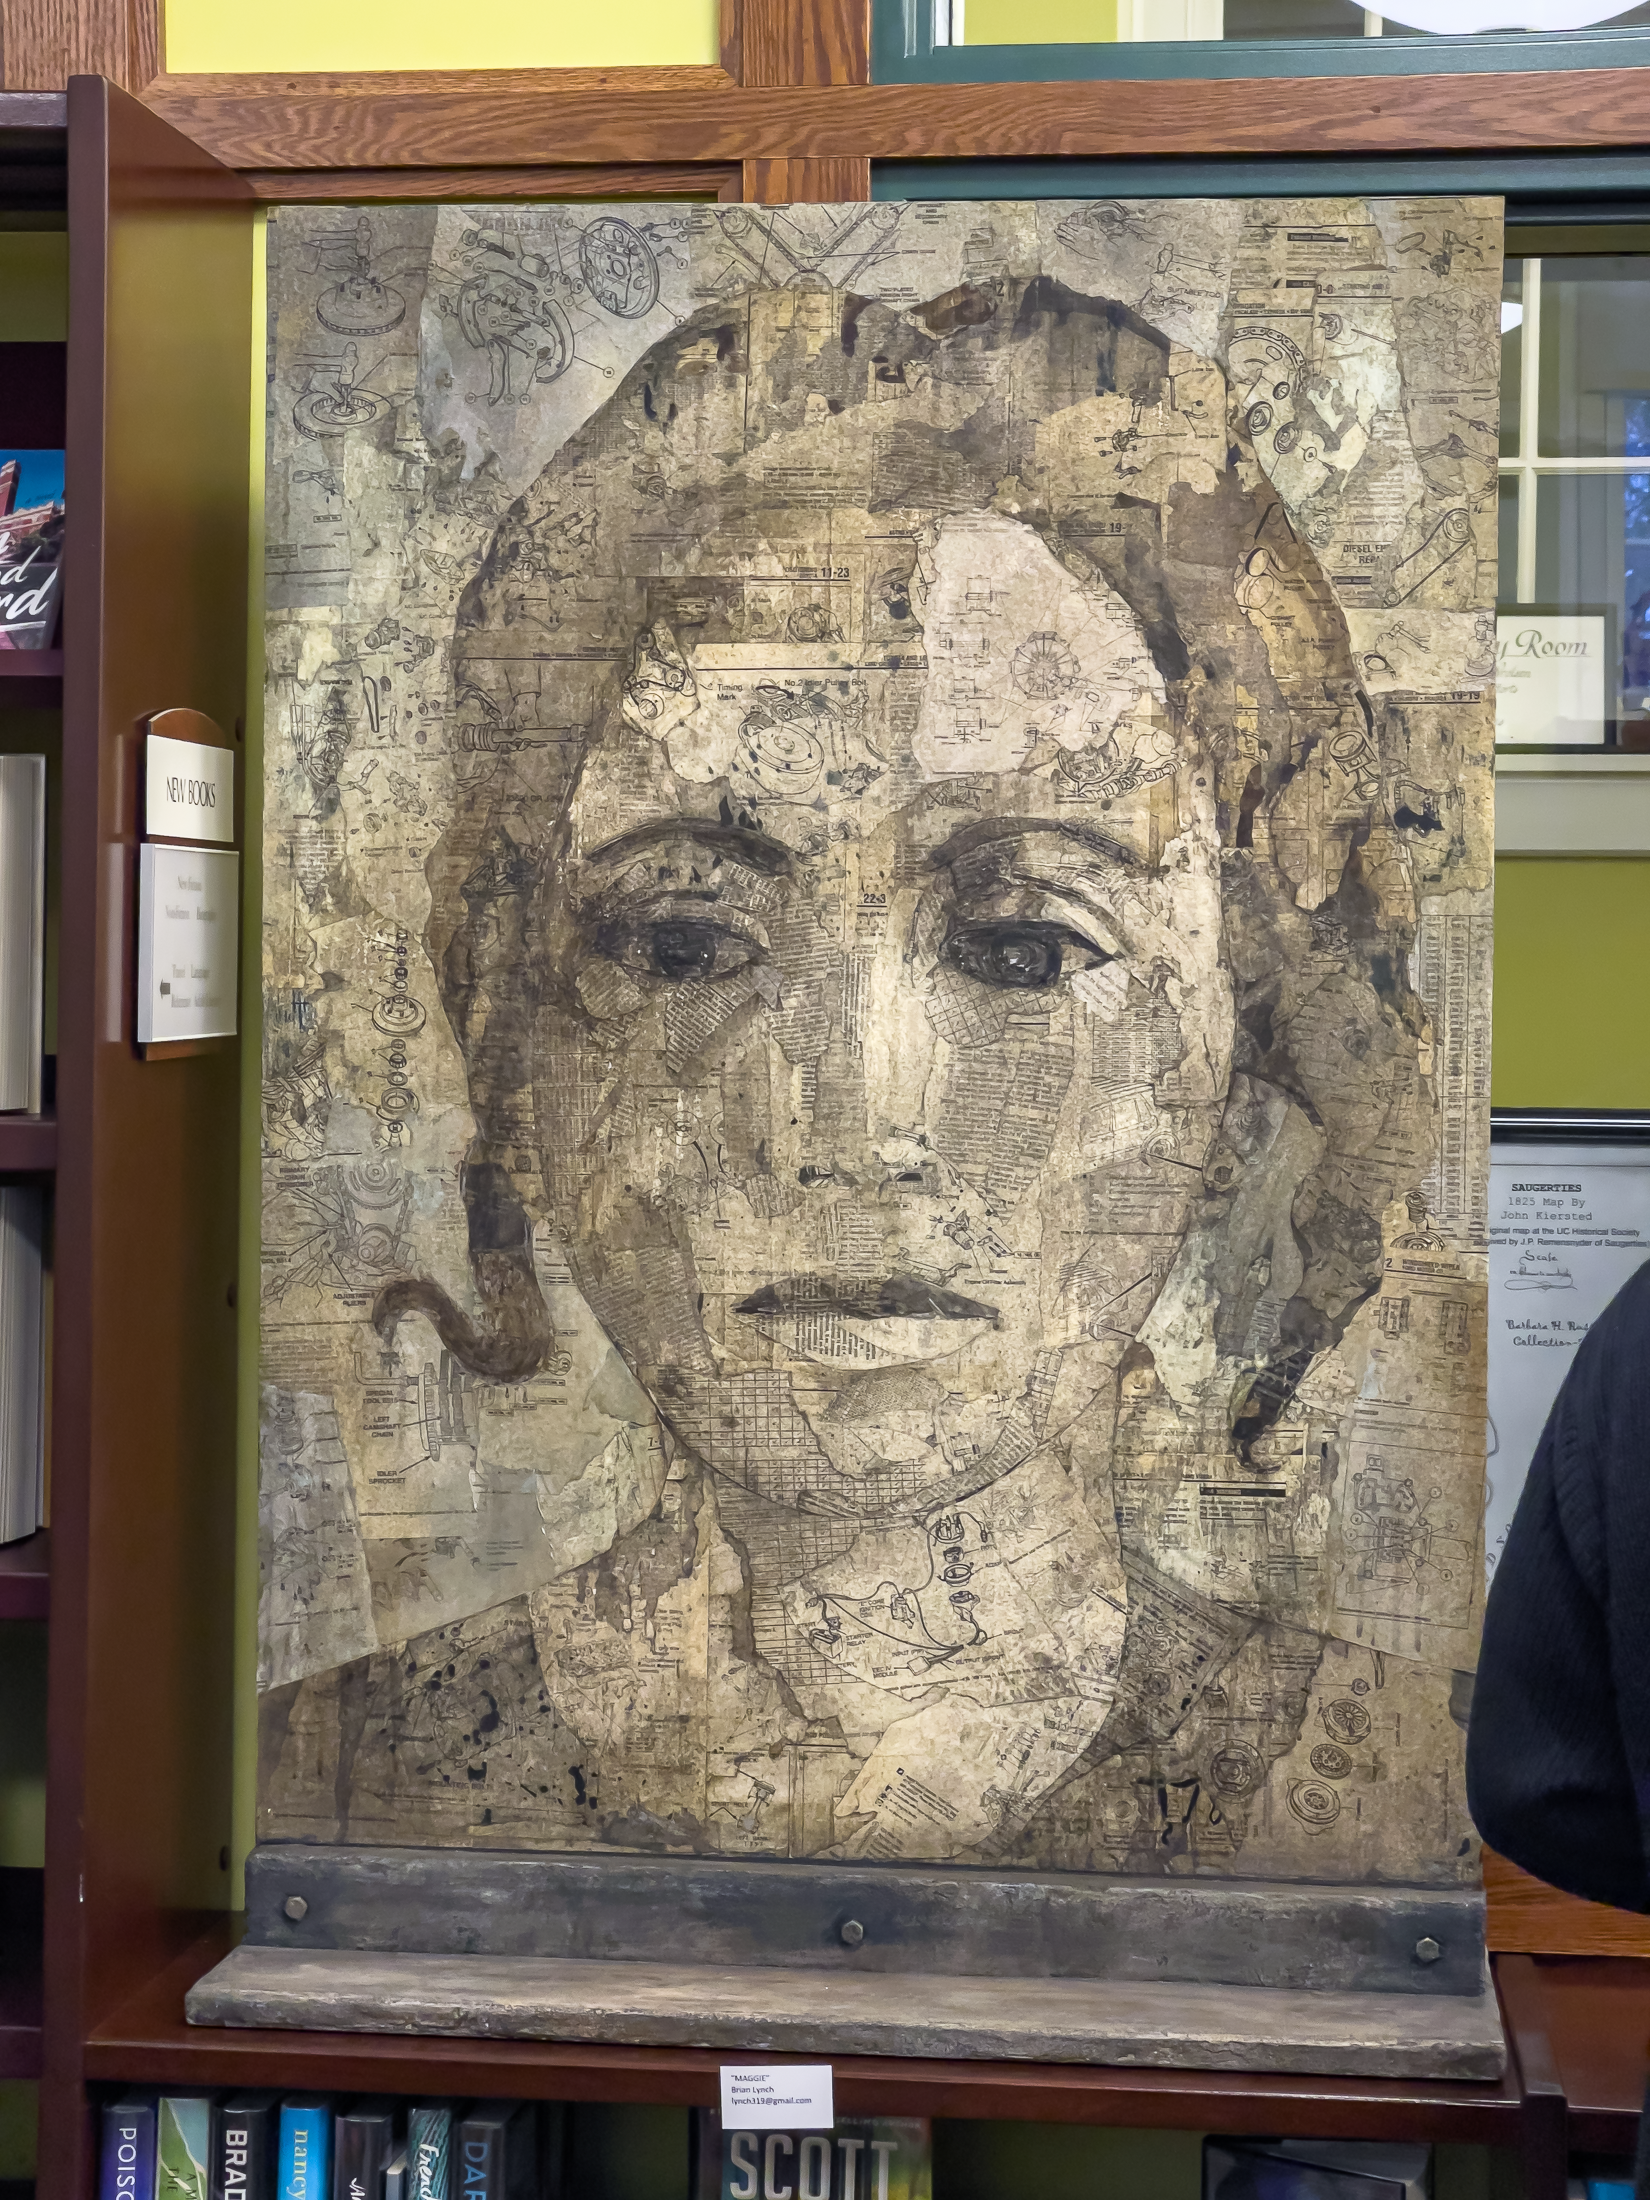 Collage portrait of a woman made with pieces of the pages of a book.